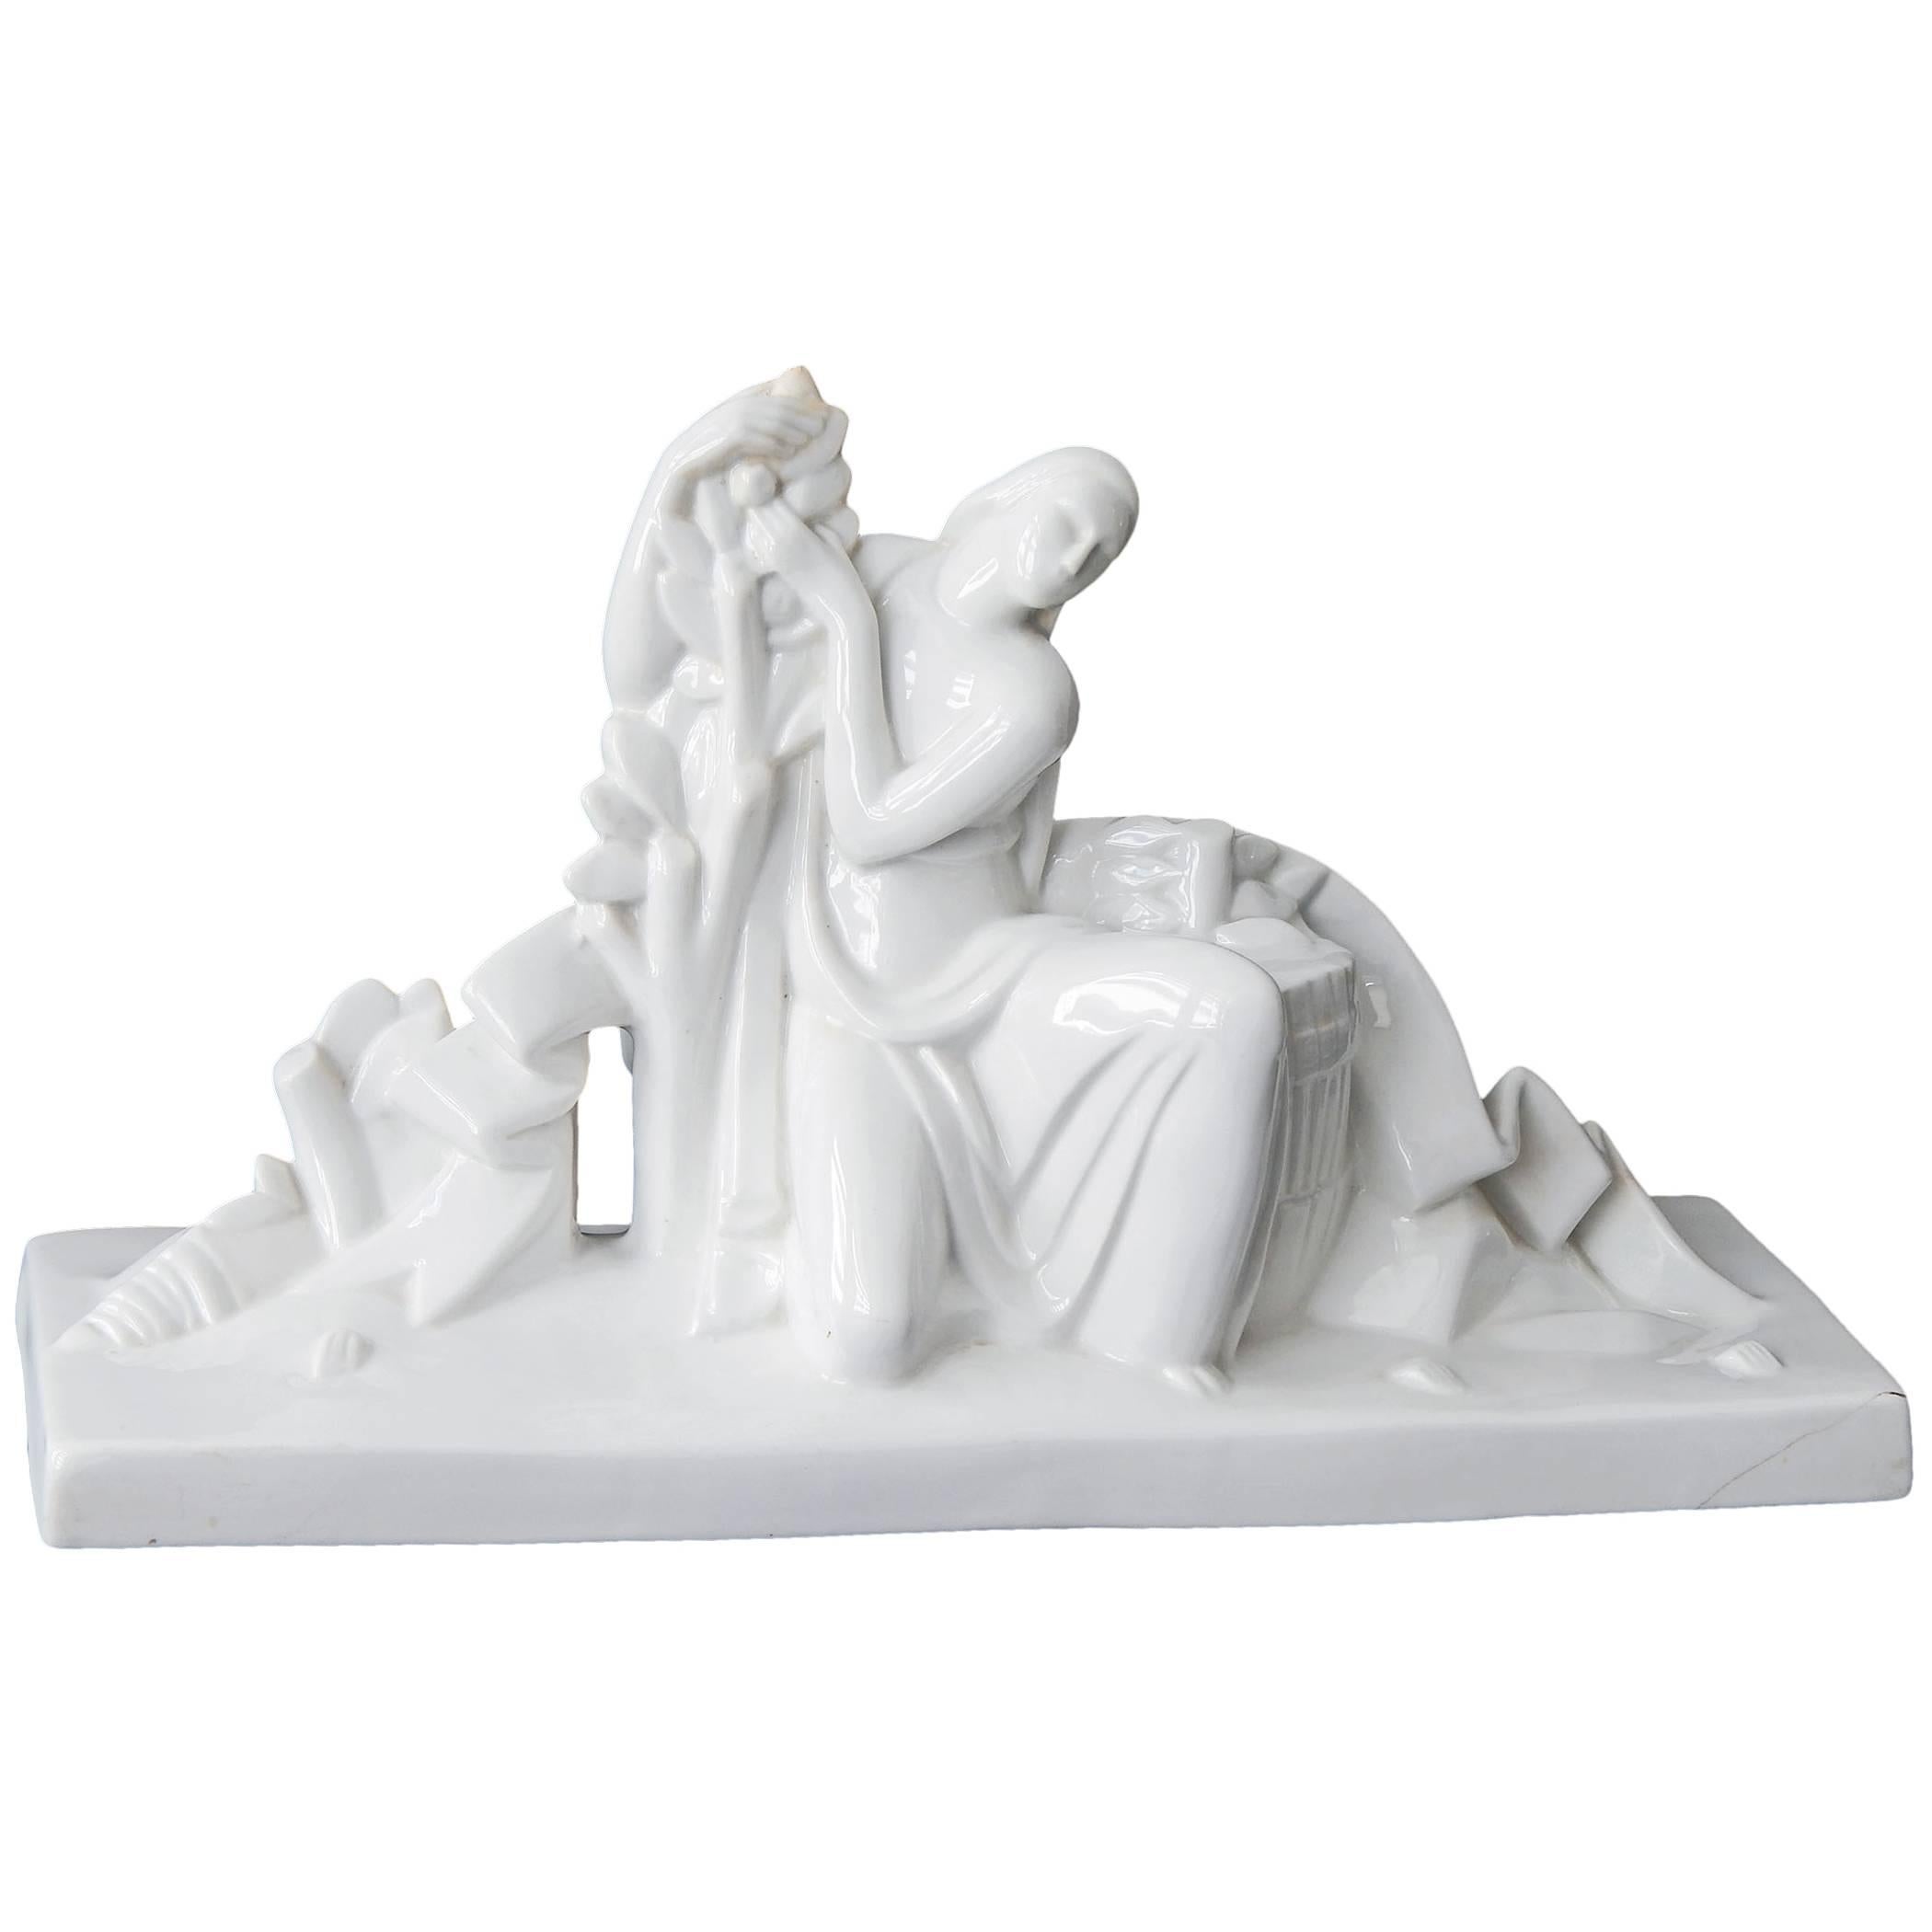 "Allegory of Abundance, " Important MGM Movie Prop, Art Deco Sculpture For Sale